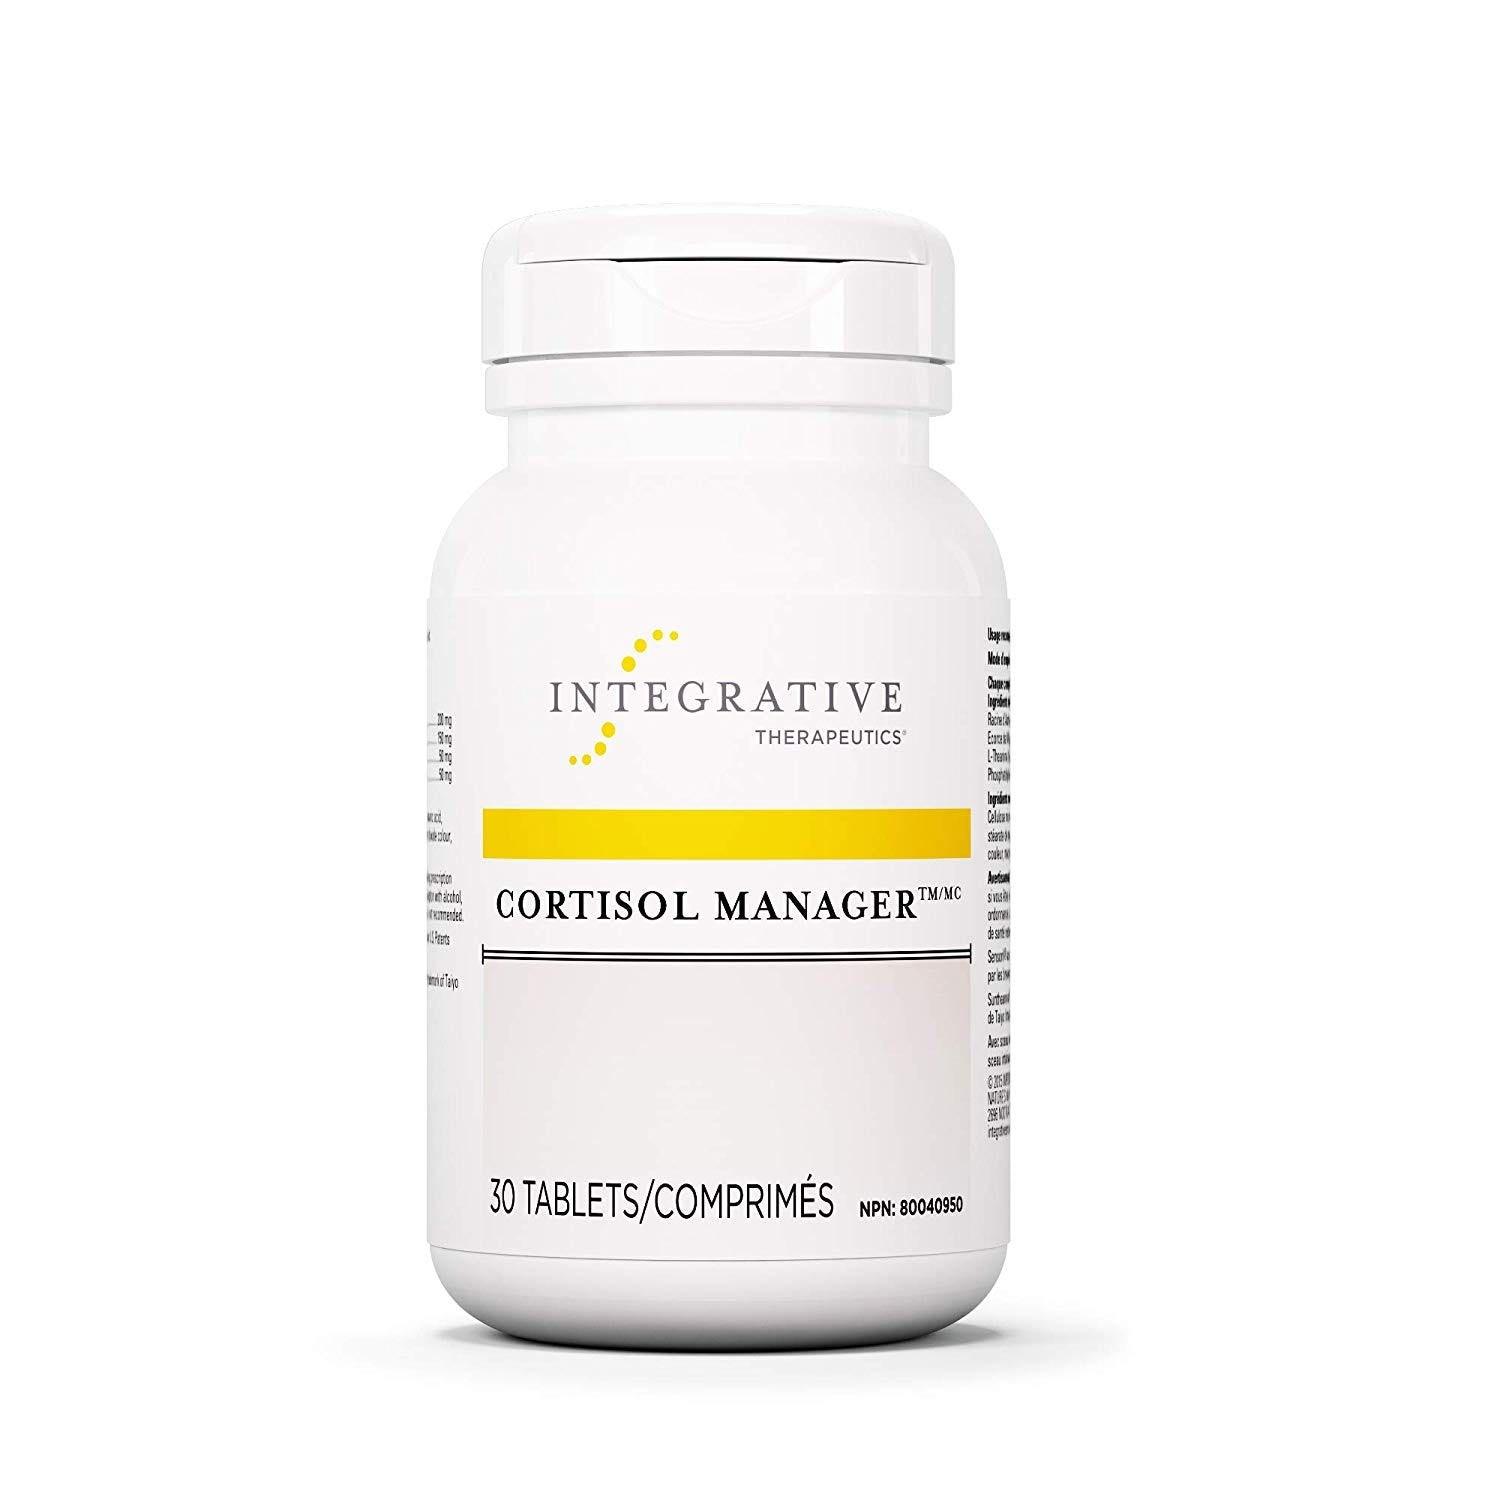 Integrative Therapeutics Cortisol Manager, 30 Tablets Online